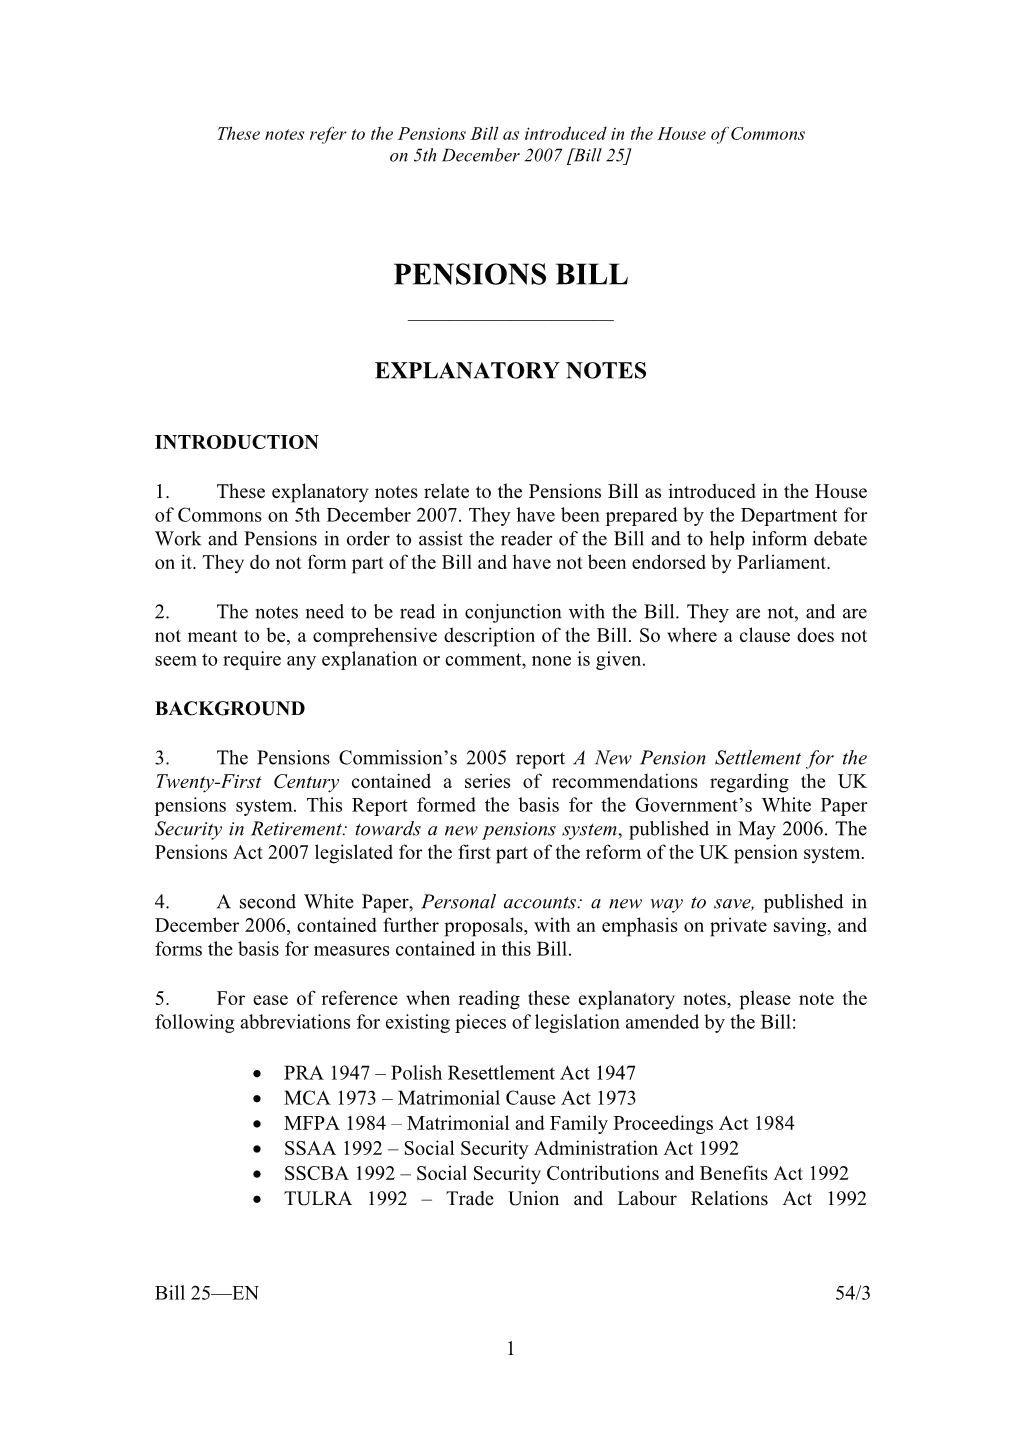 Pensions Bill As Introduced in the House of Commons on 5Th December 2007 [Bill 25]